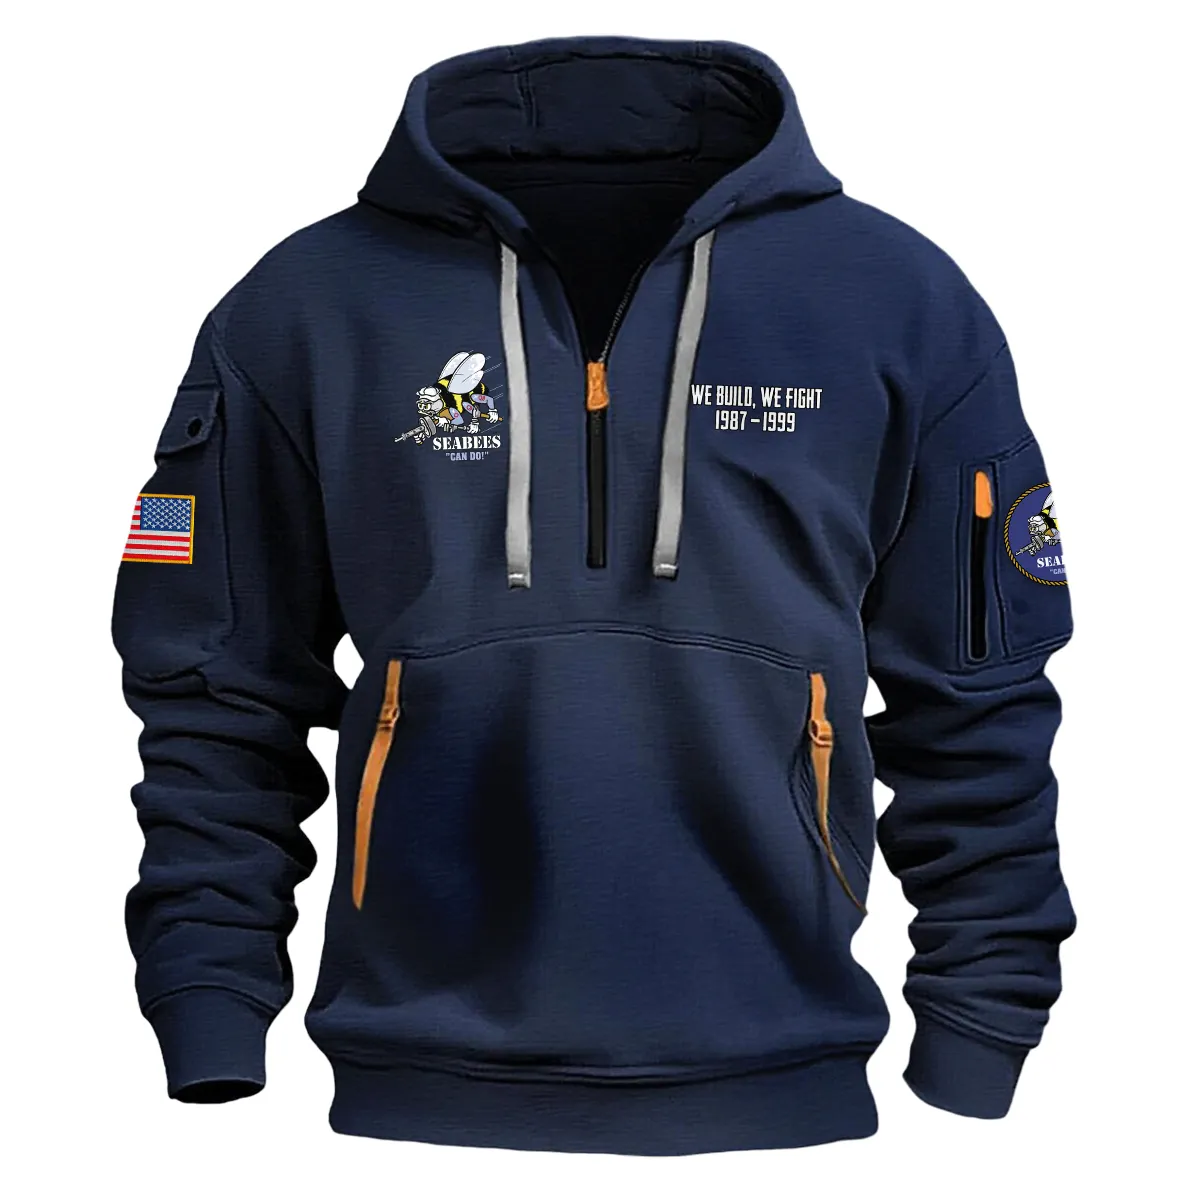 US Military All Branches! Personalized Gift U.S. Seabee Fashion Hoodie Half Zipper